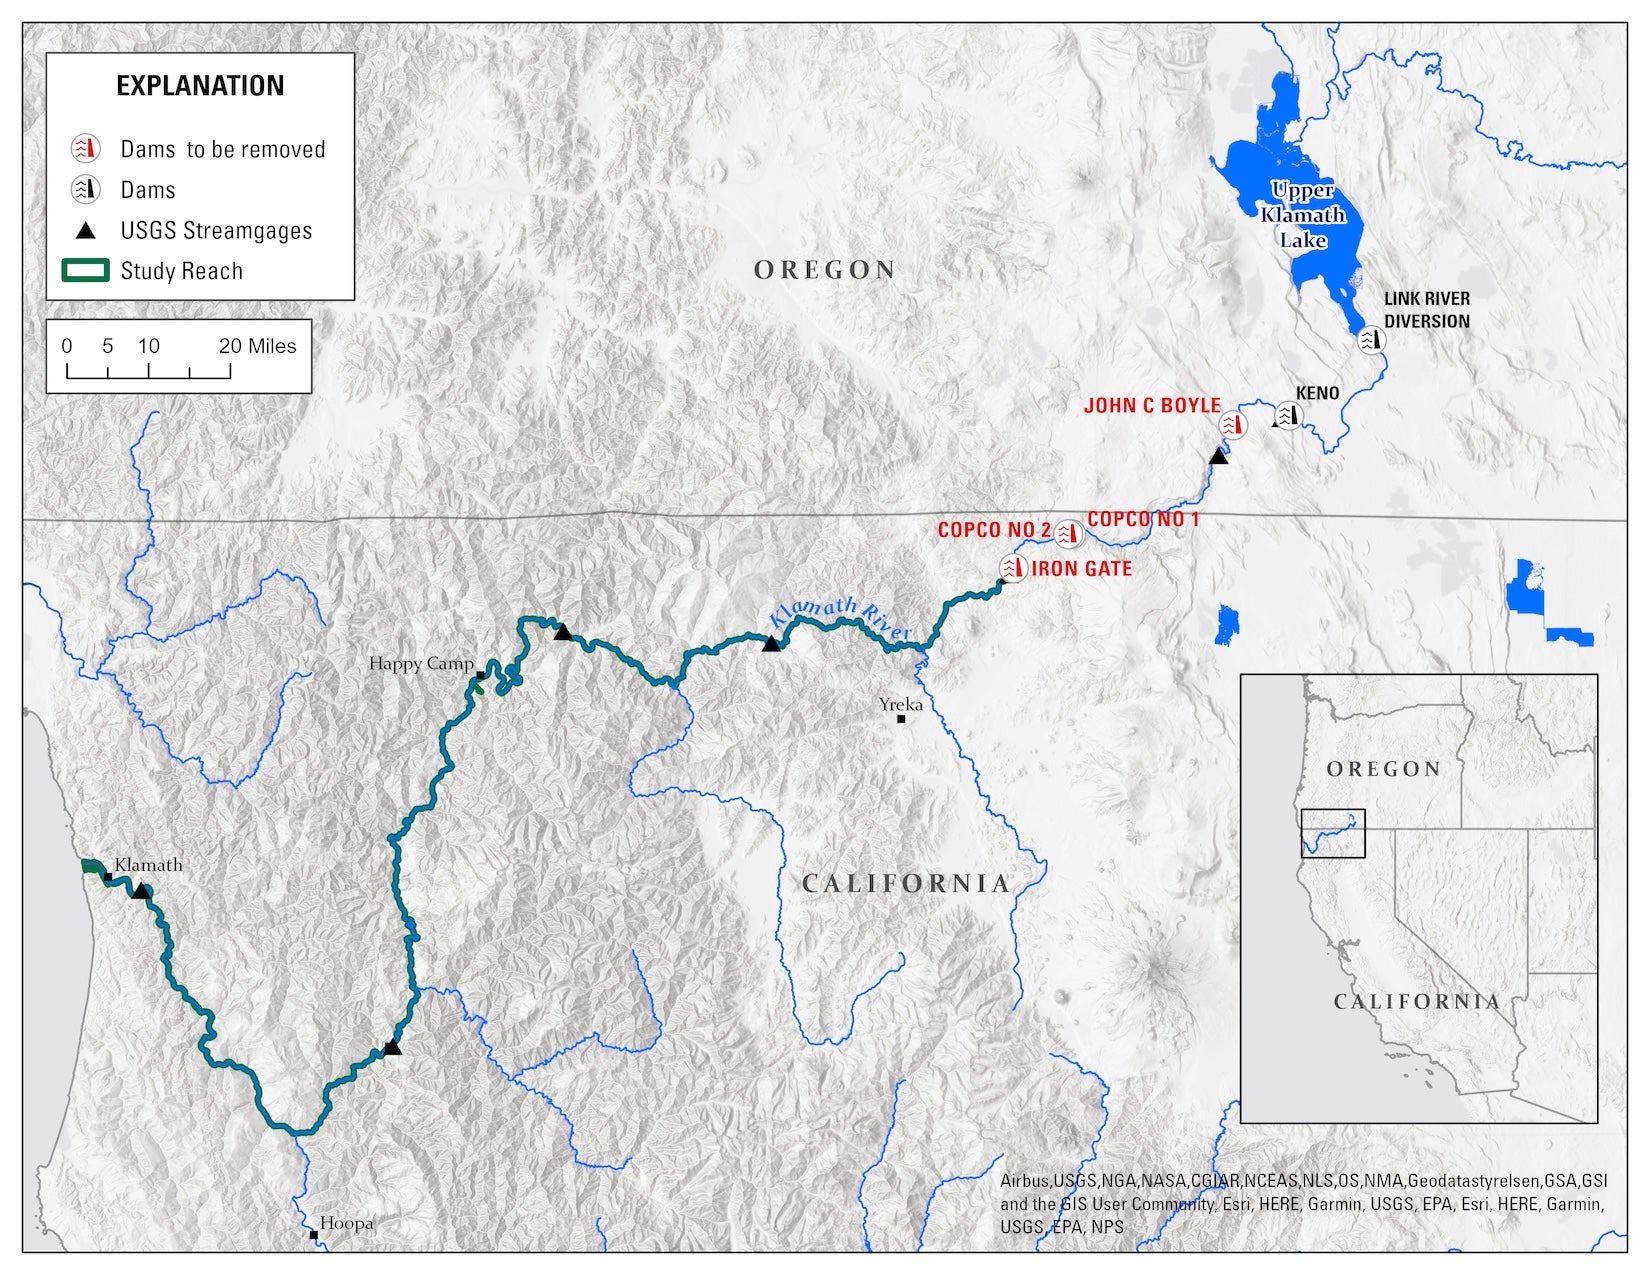 Map of northern Californa and southern Oregon pinpointing dams being removed on the Klamath River.  